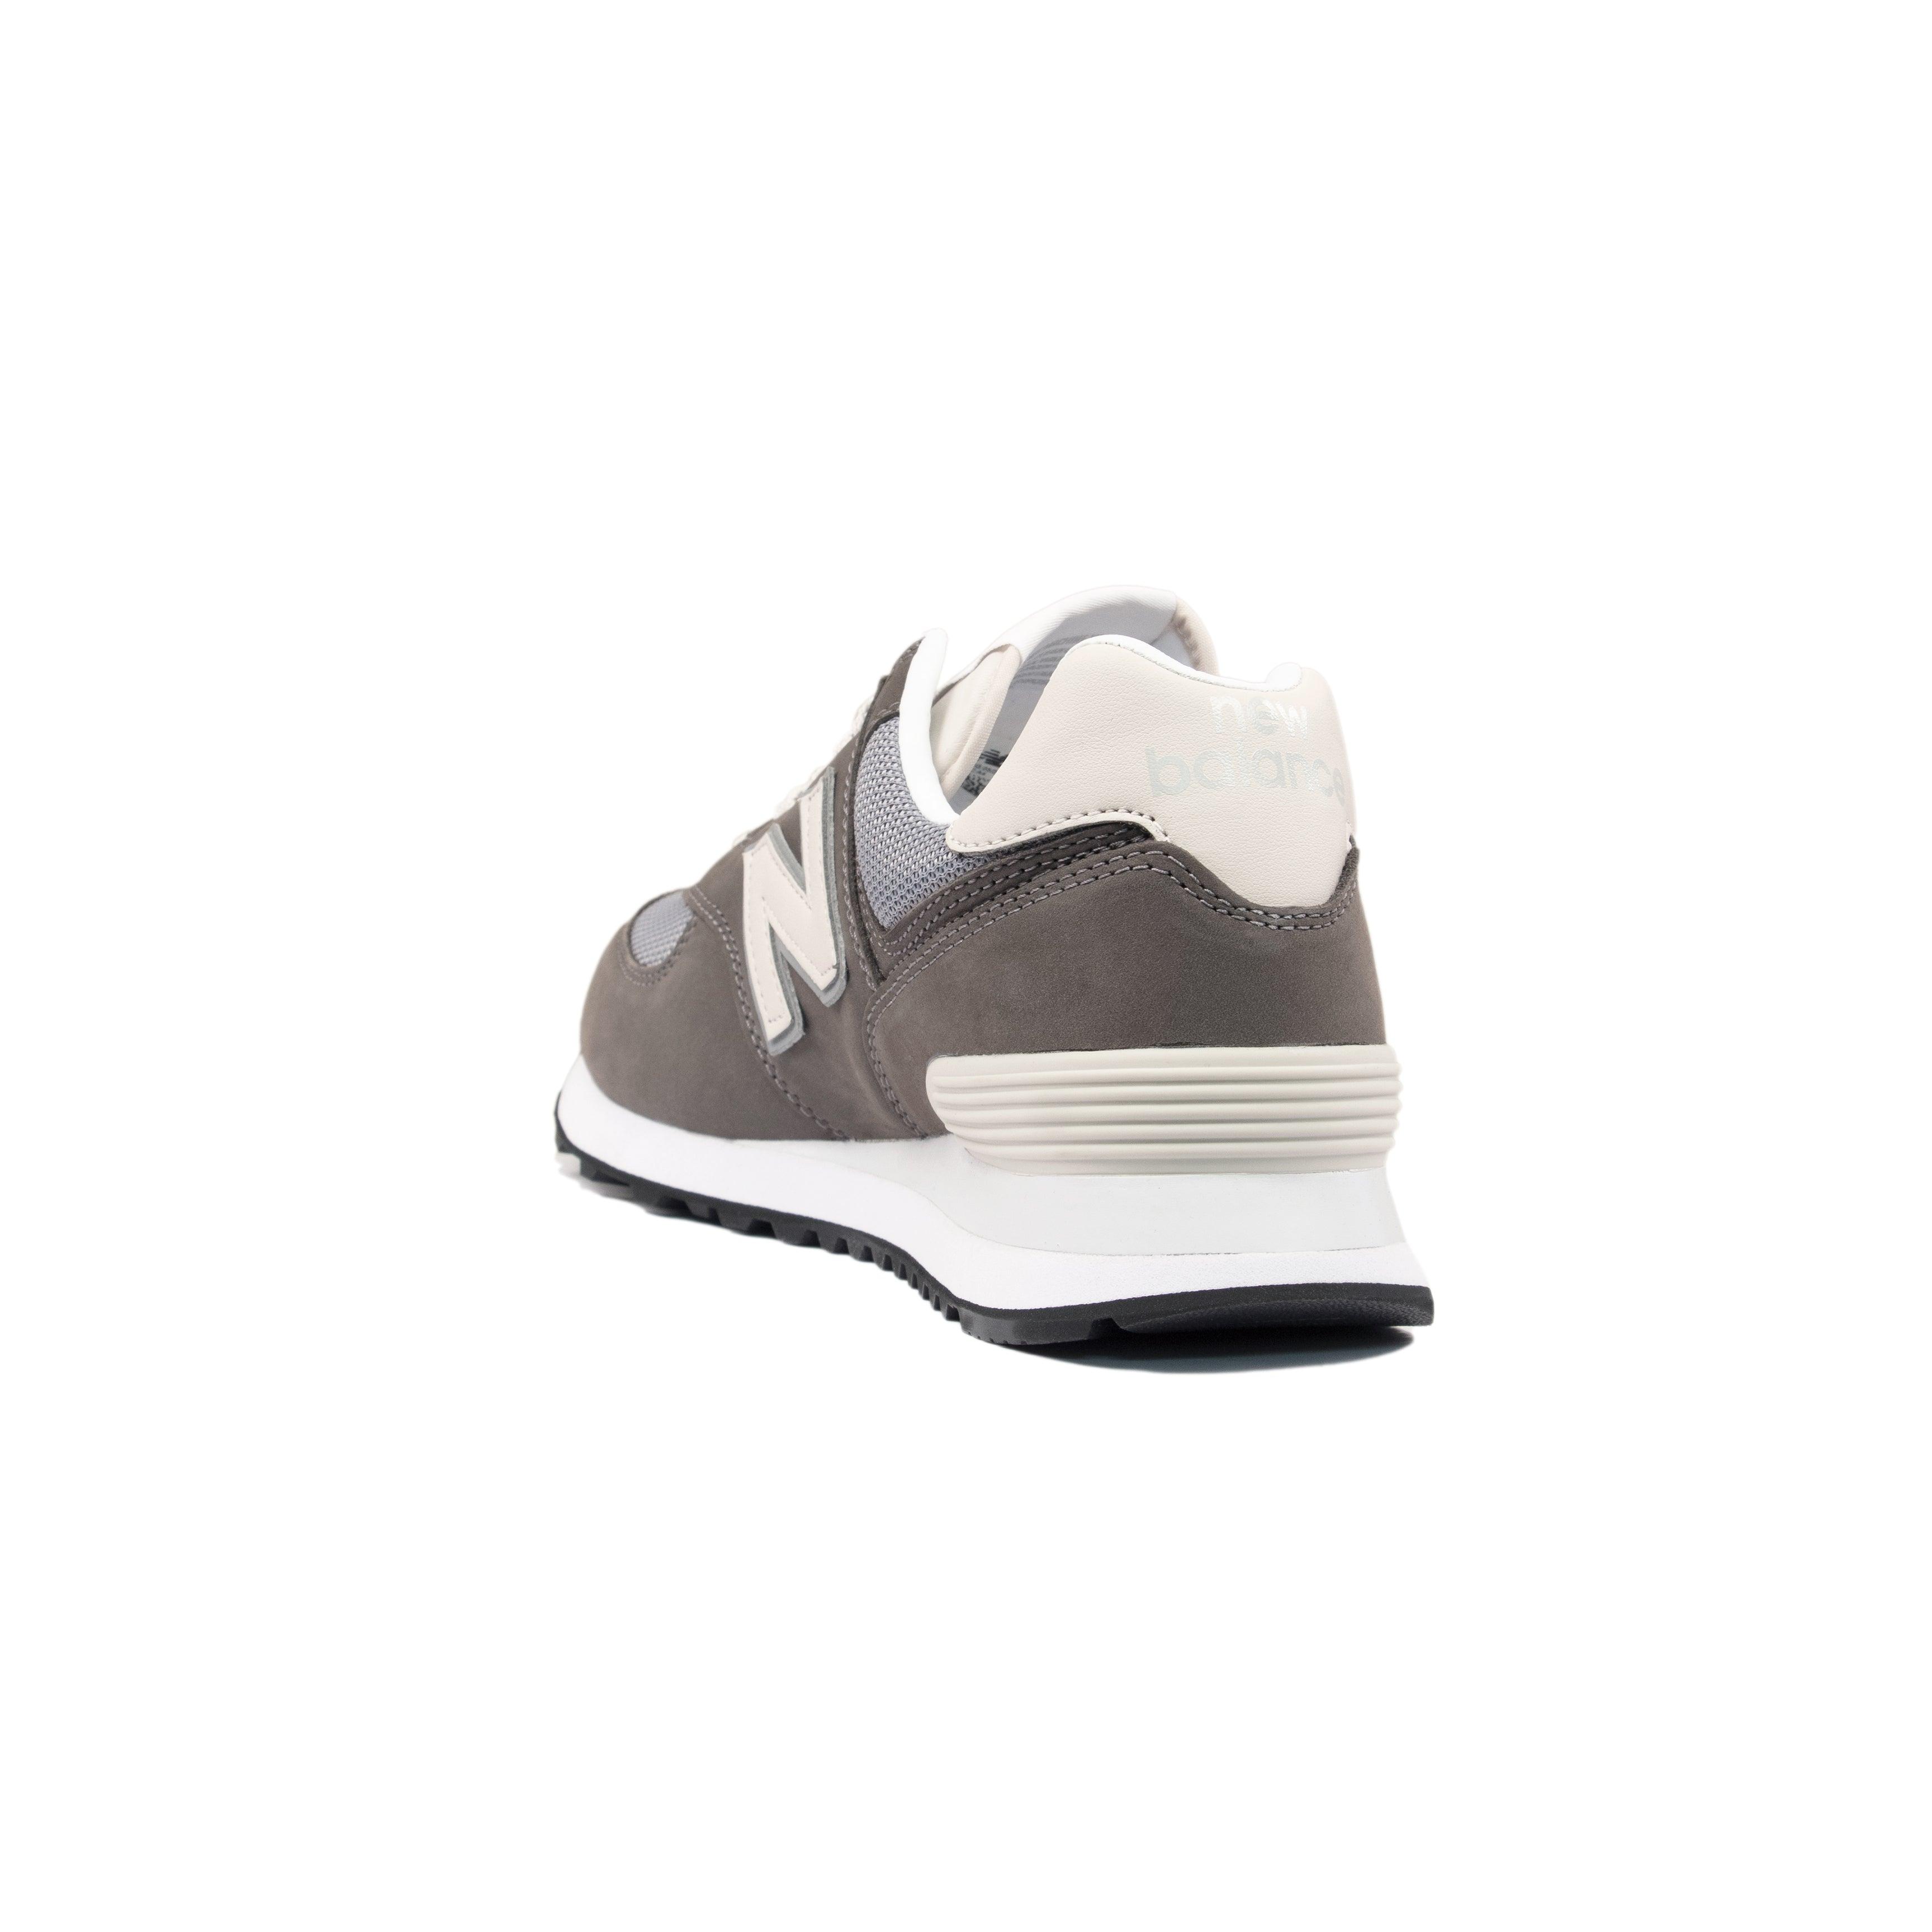 New Balance 574 Suede Mesh Sneaker Grey in Gray for Men - Save 16% | Lyst